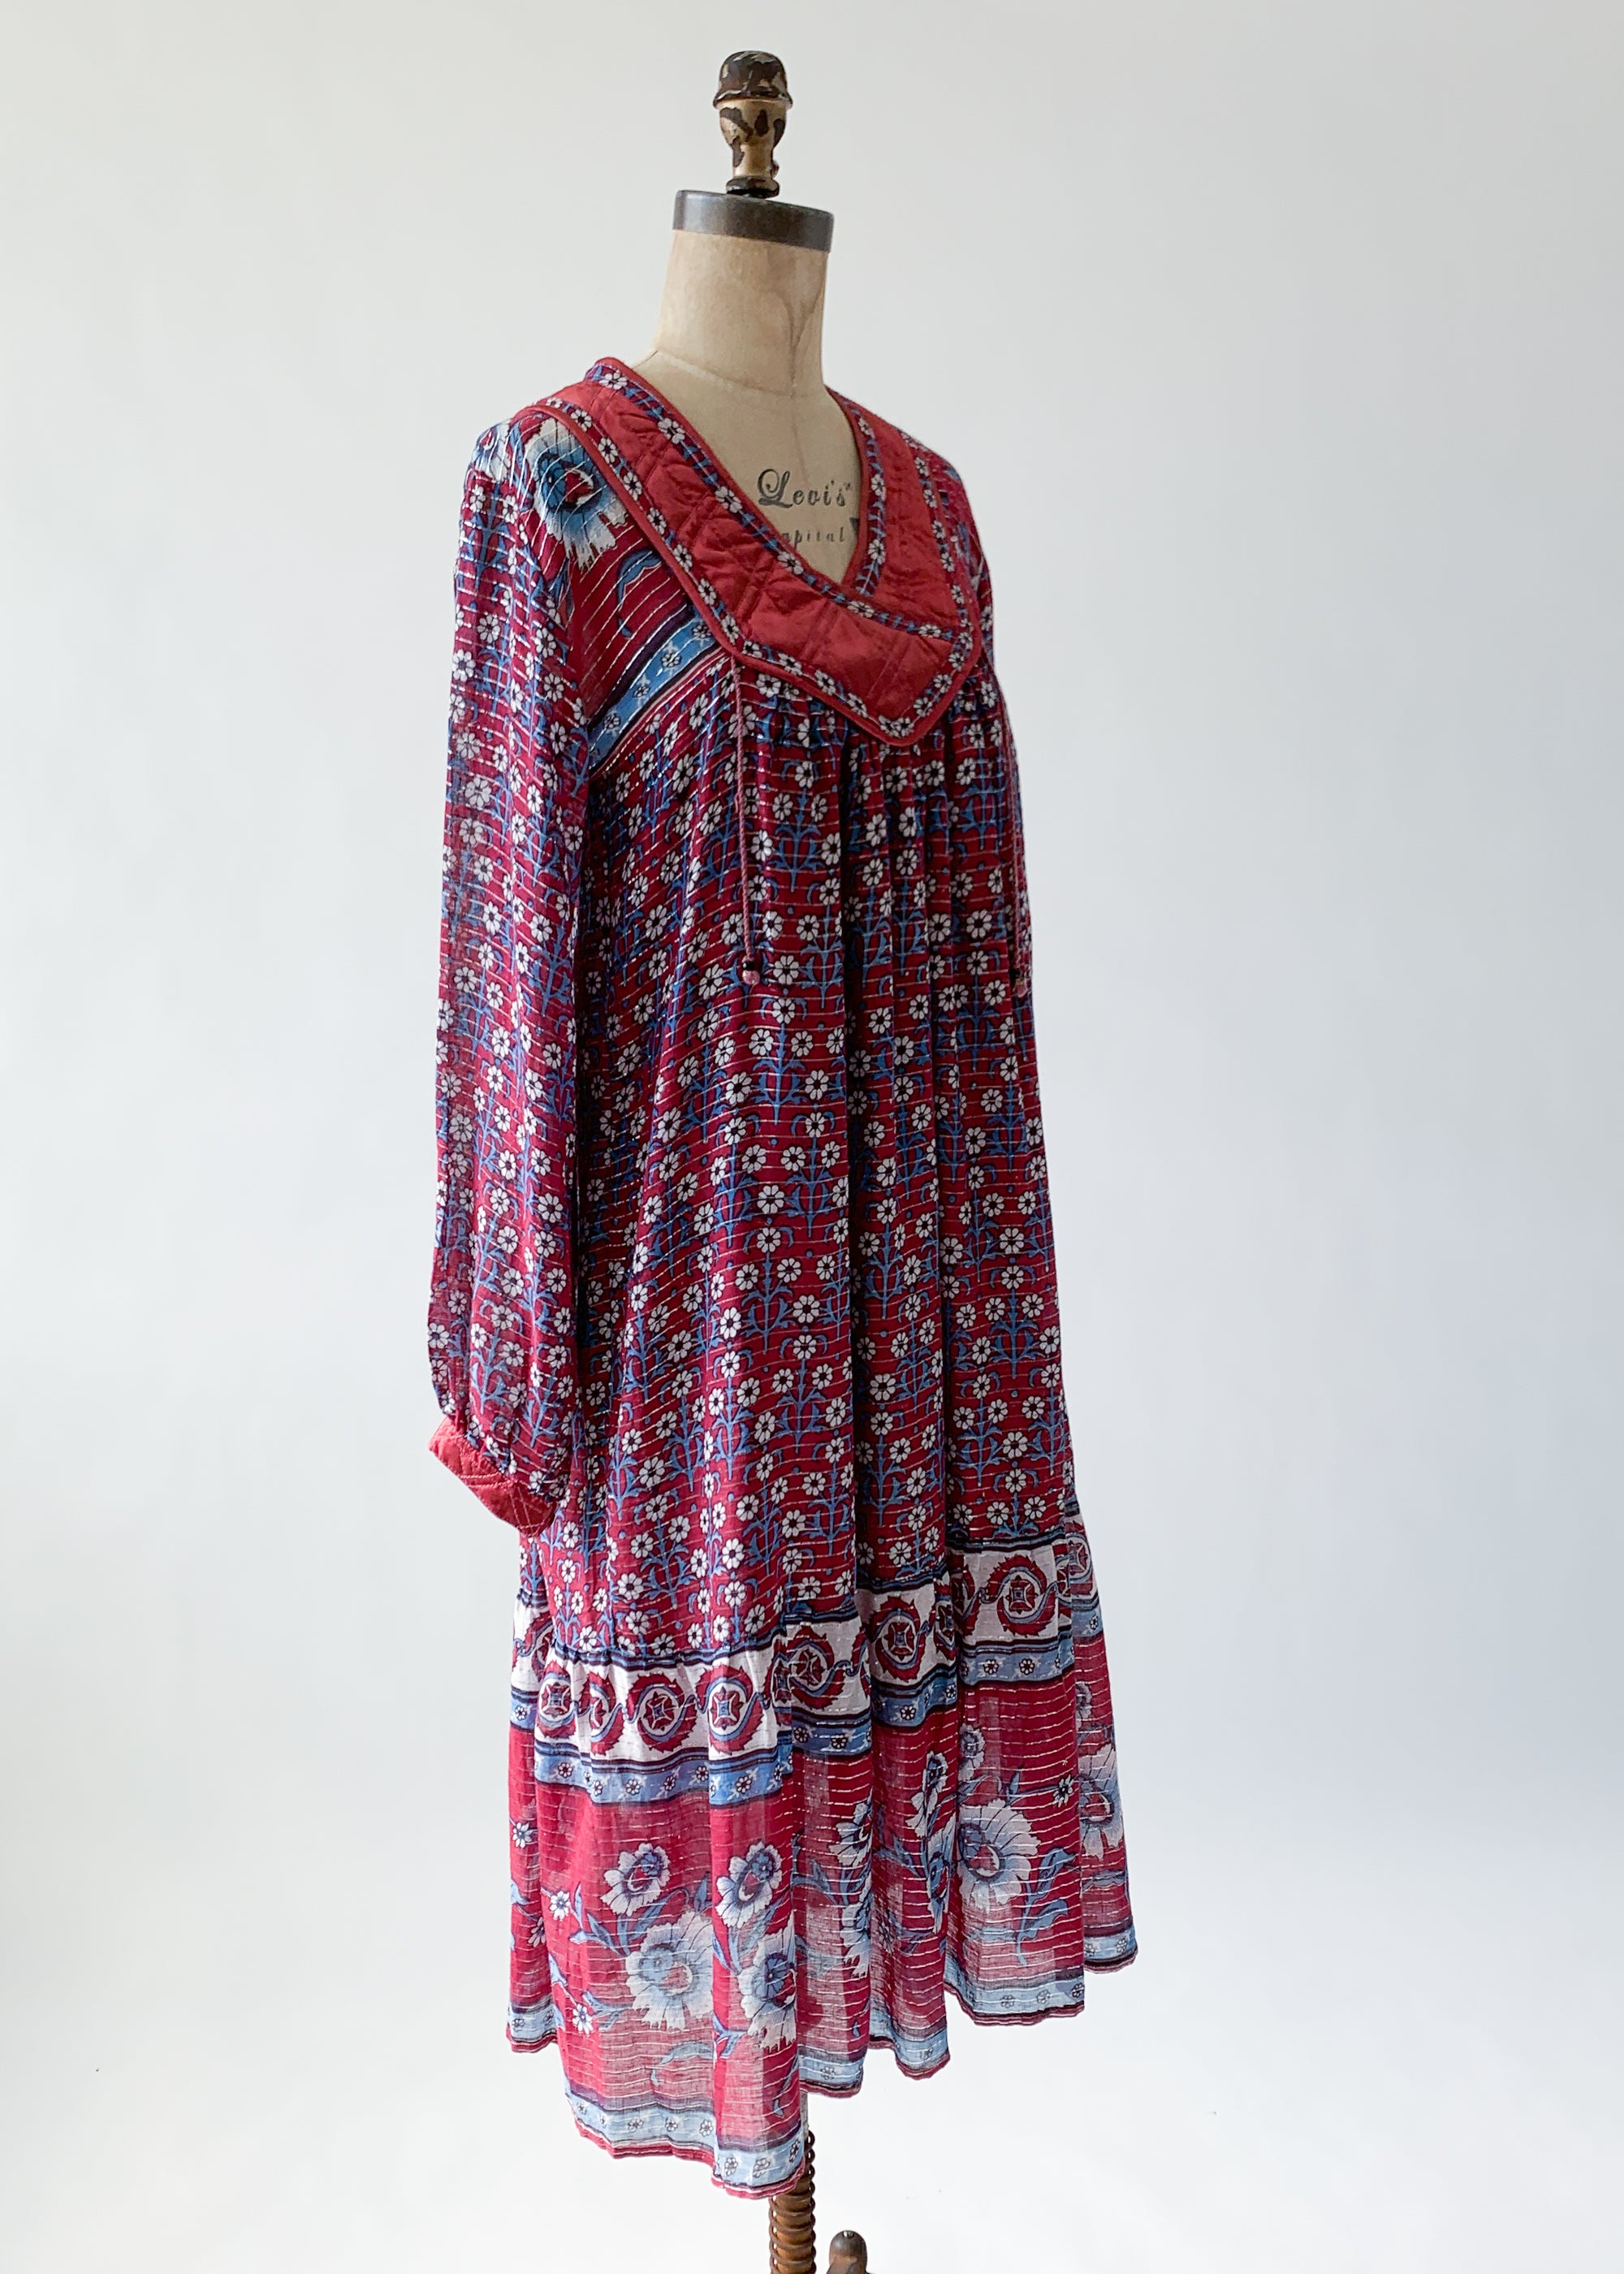 Vintage 1970s Indian Cotton Dress with Lurex Stripes - Raleigh Vintage